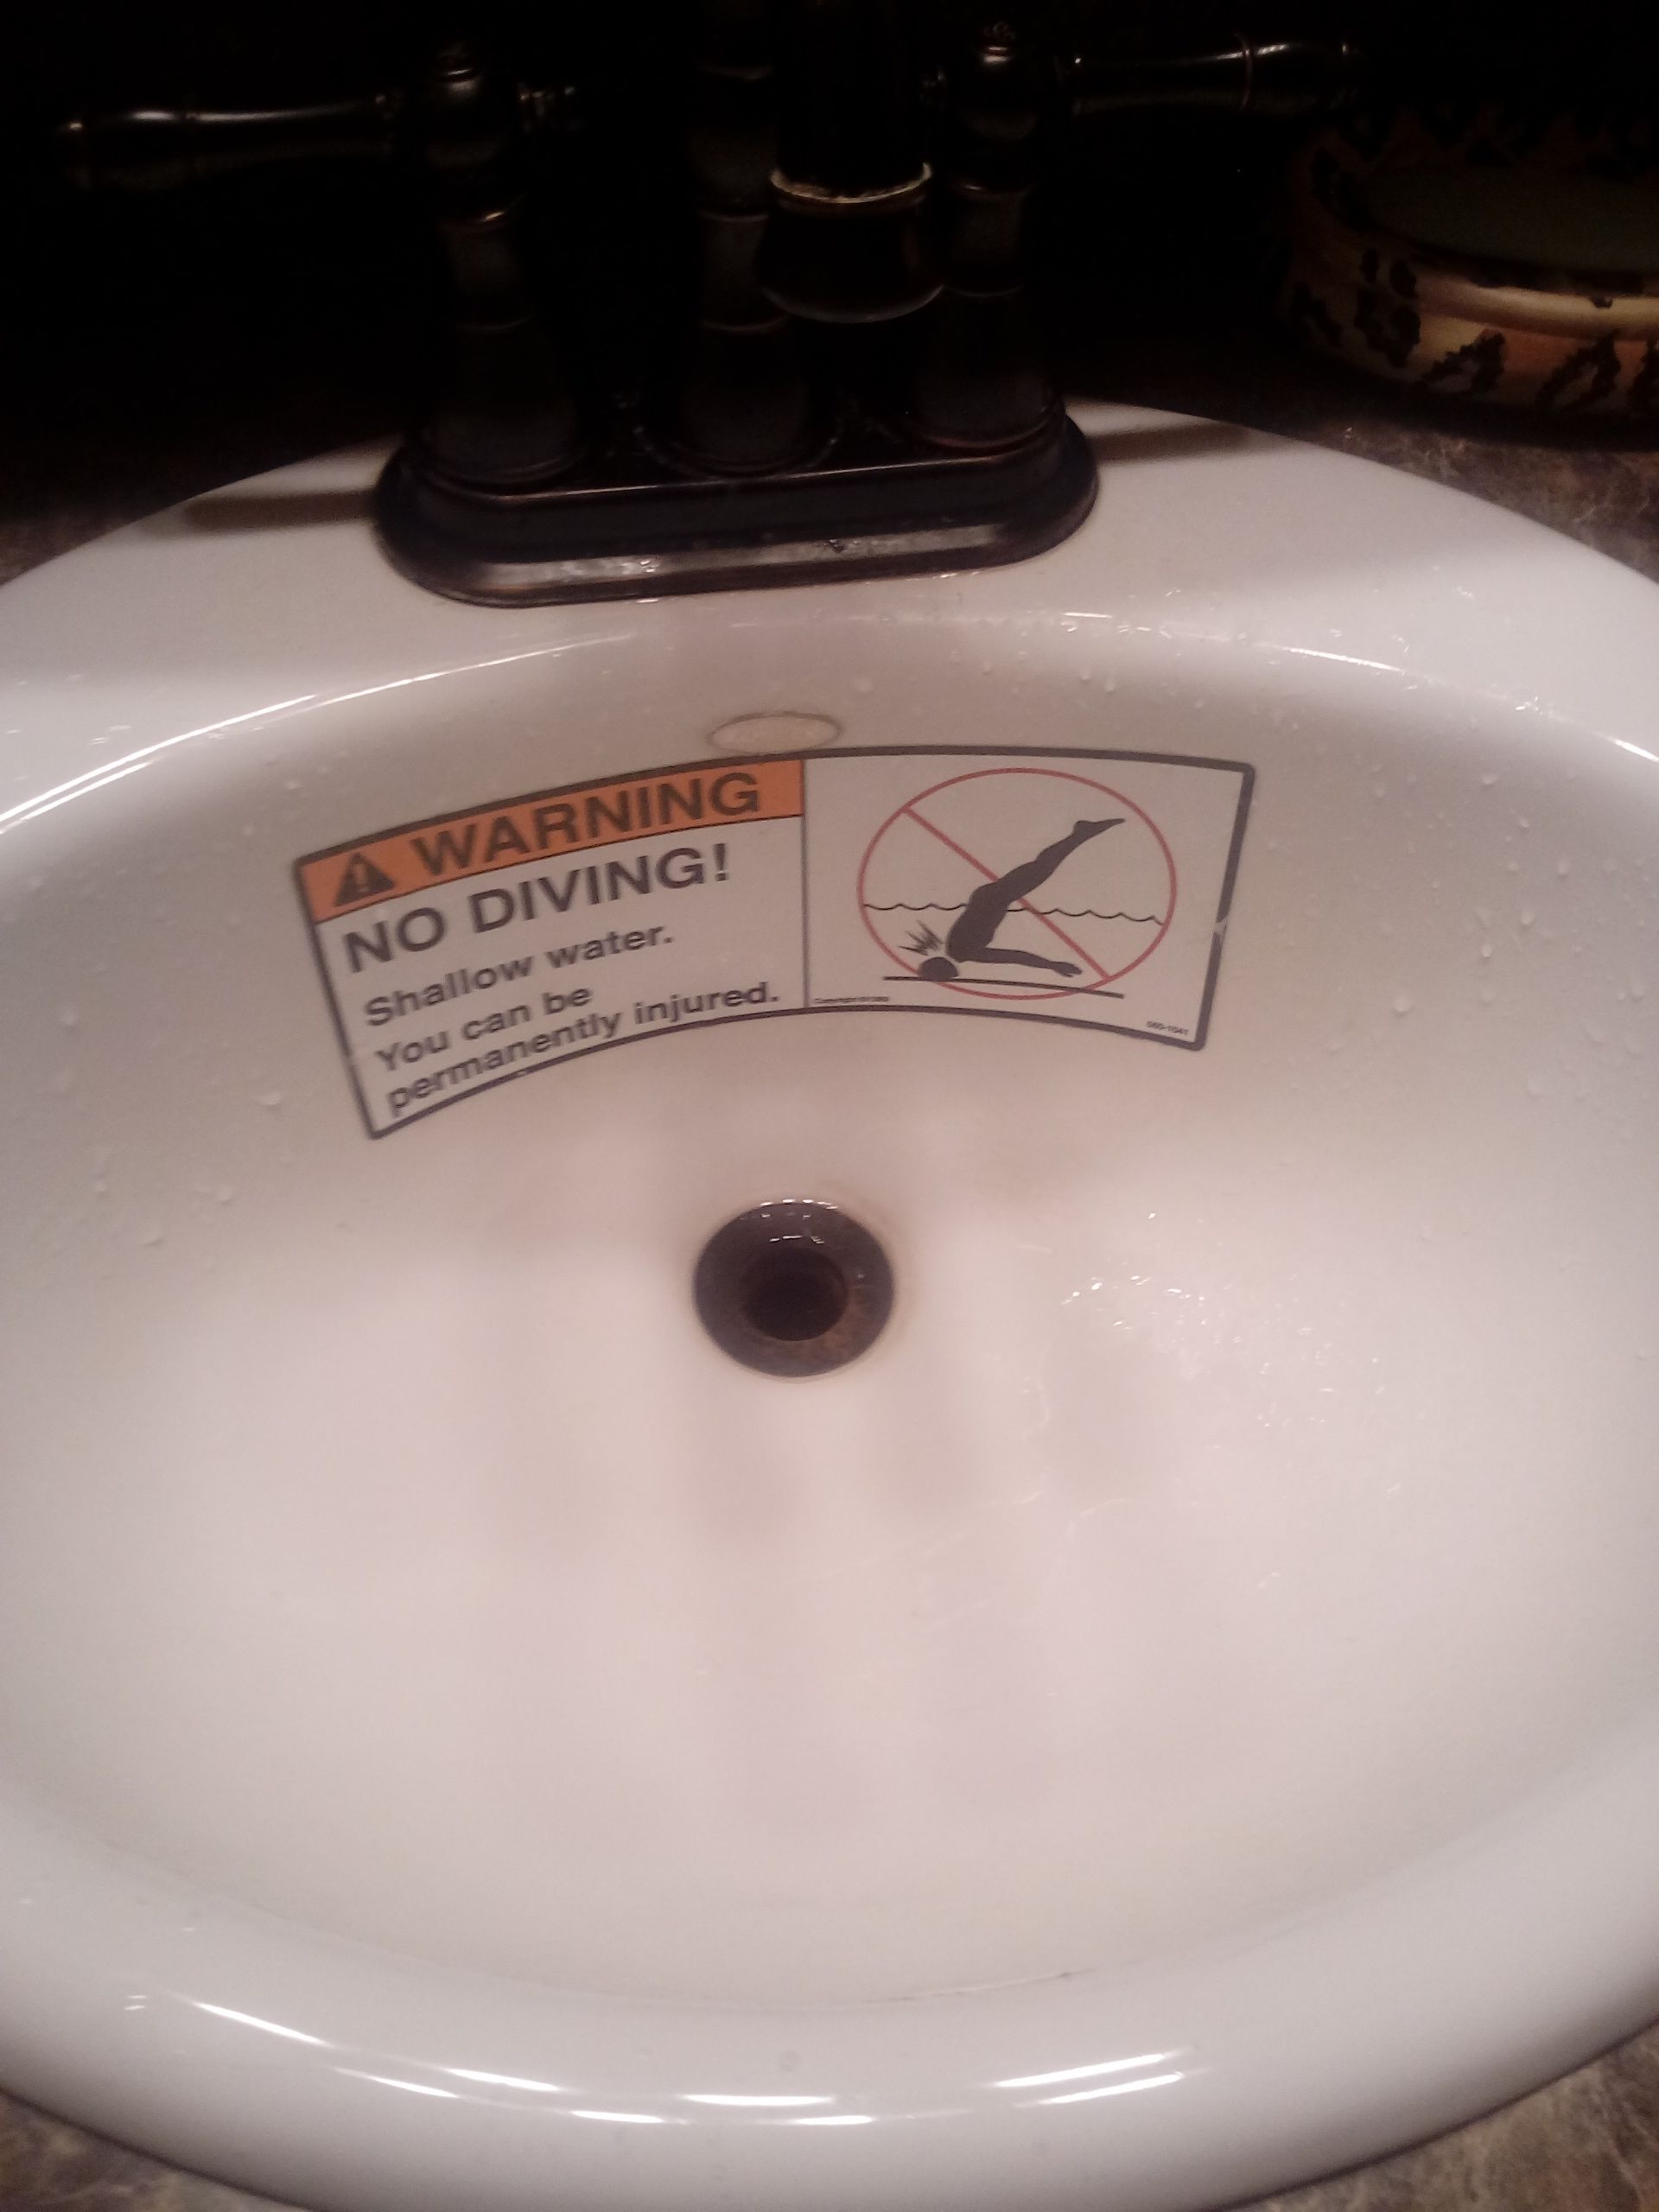 I was at a buddies house, and I needed to go to the bathroom. I found this in his sink.